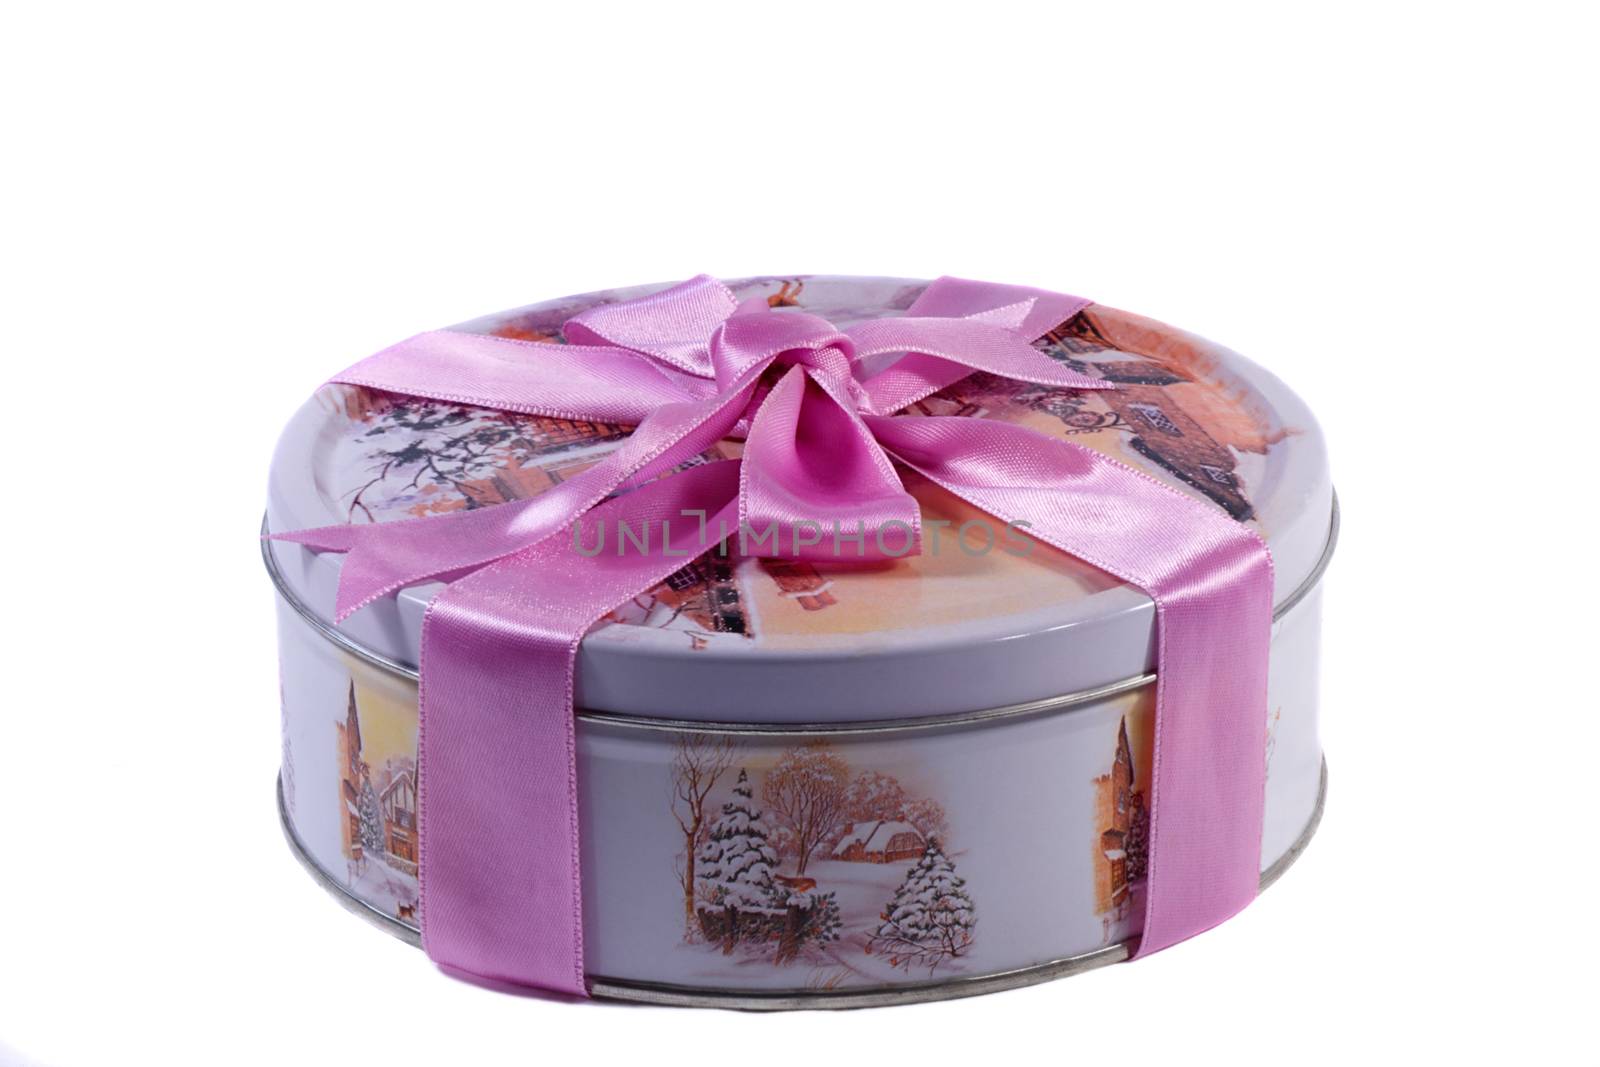 Gift: a beautiful box with the image of winter, decorated with a by georgina198